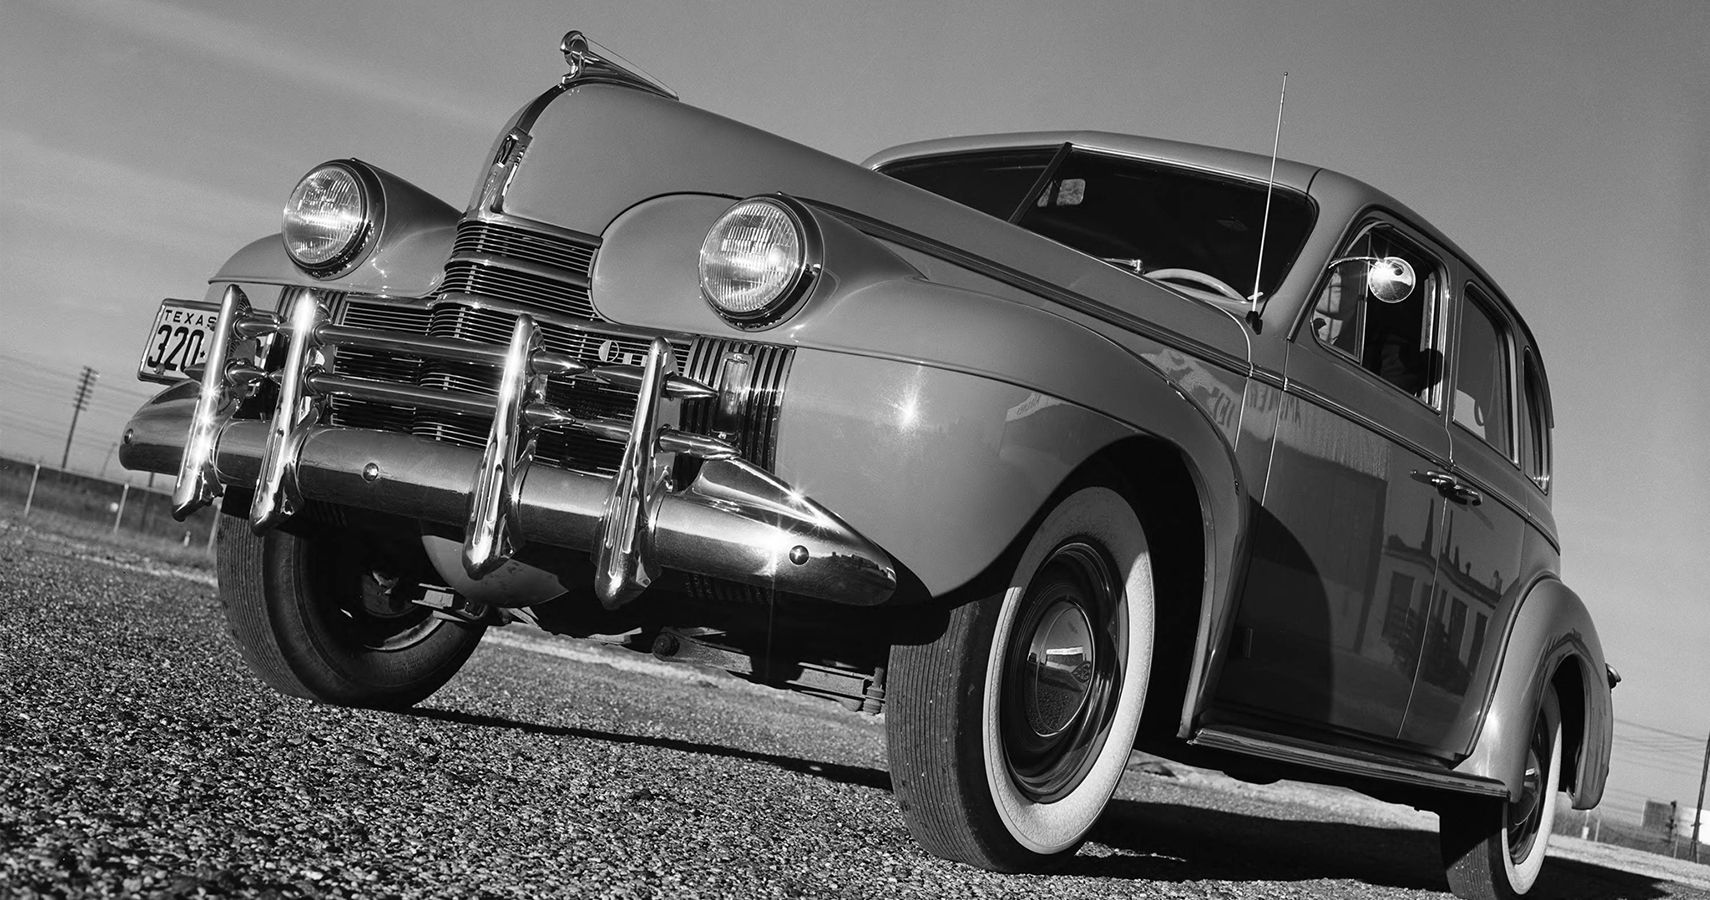 The Good Olds: 1940 Oldsmobile Series 70, First Automatic Transmission